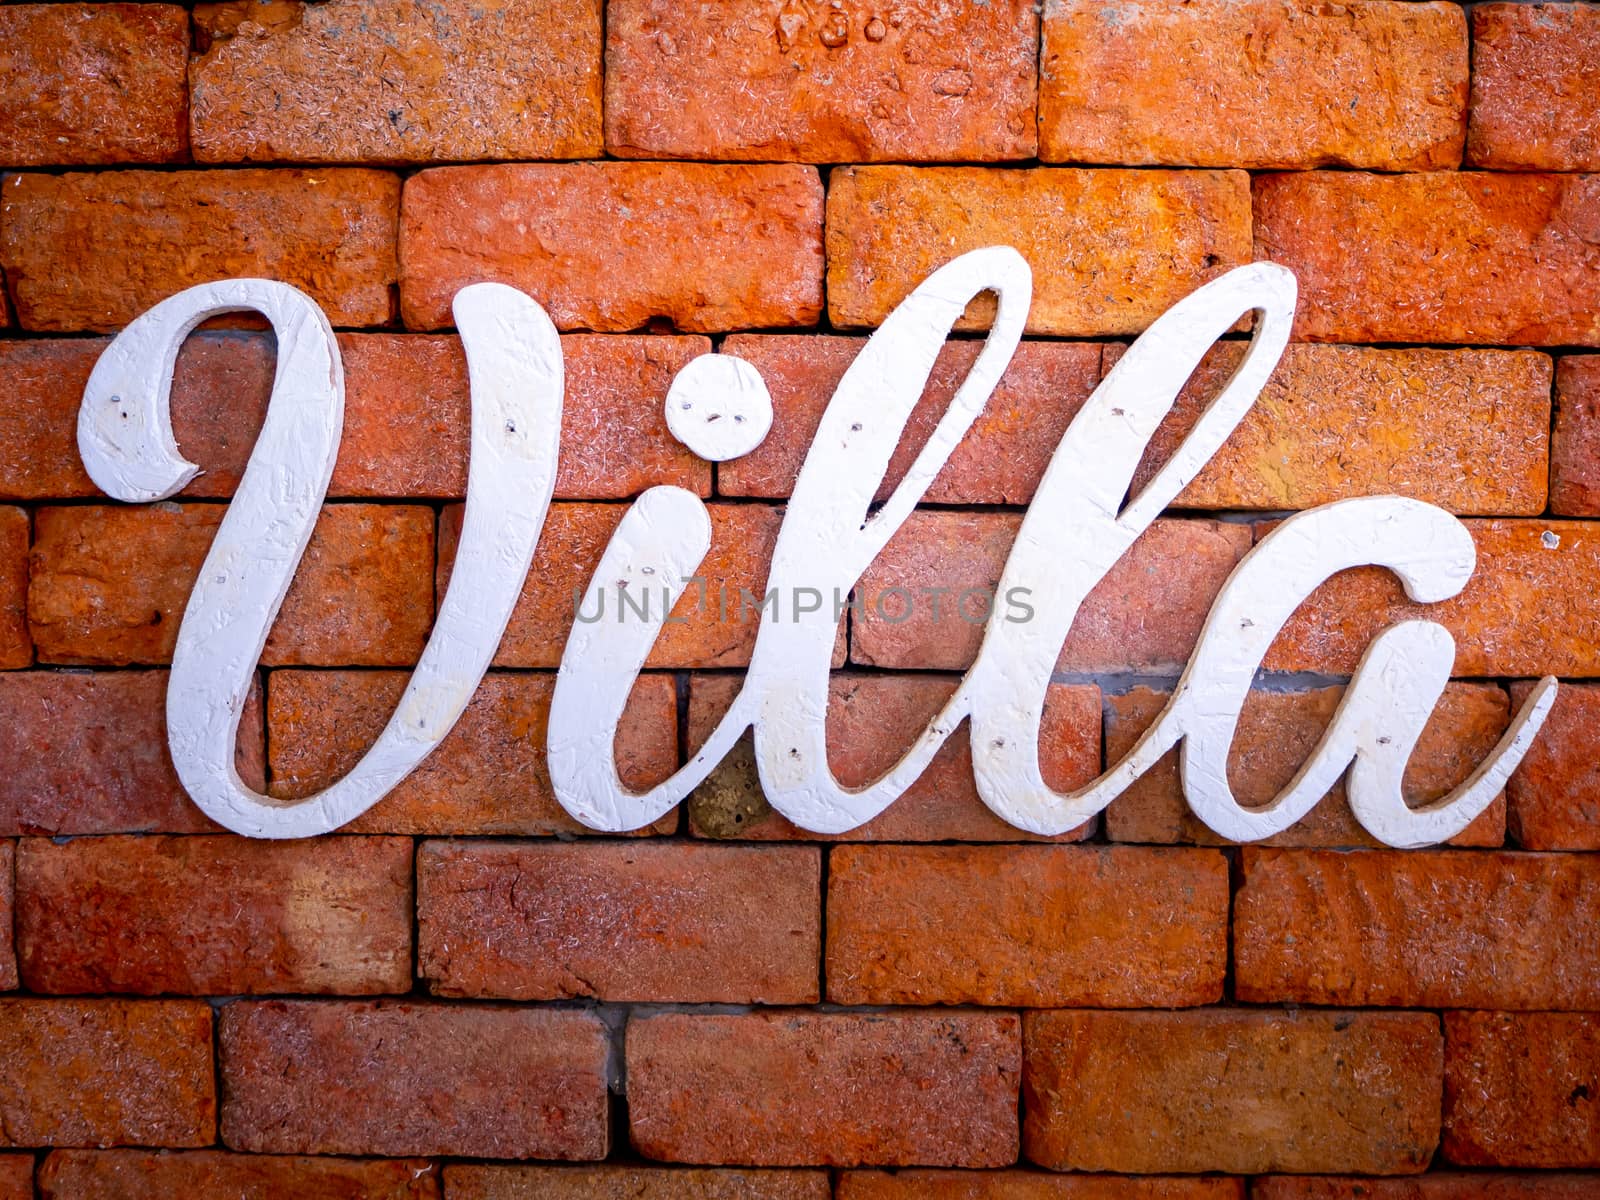 Villa on old red brick wall texture background by shutterbird